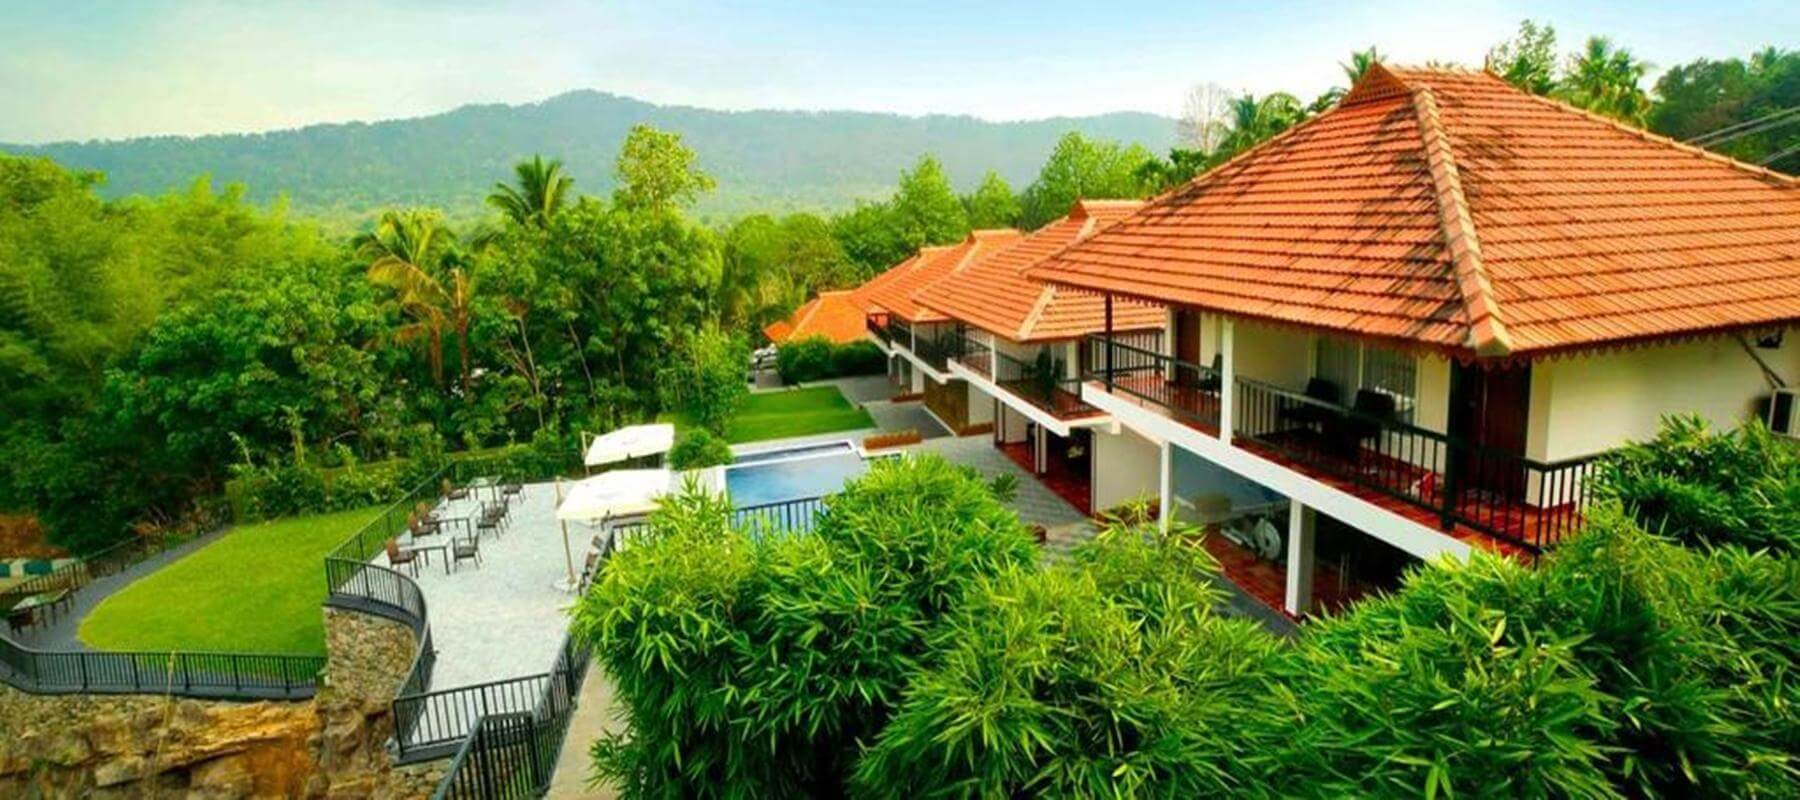 Honeymoon Places In Kerala: Athirappilly